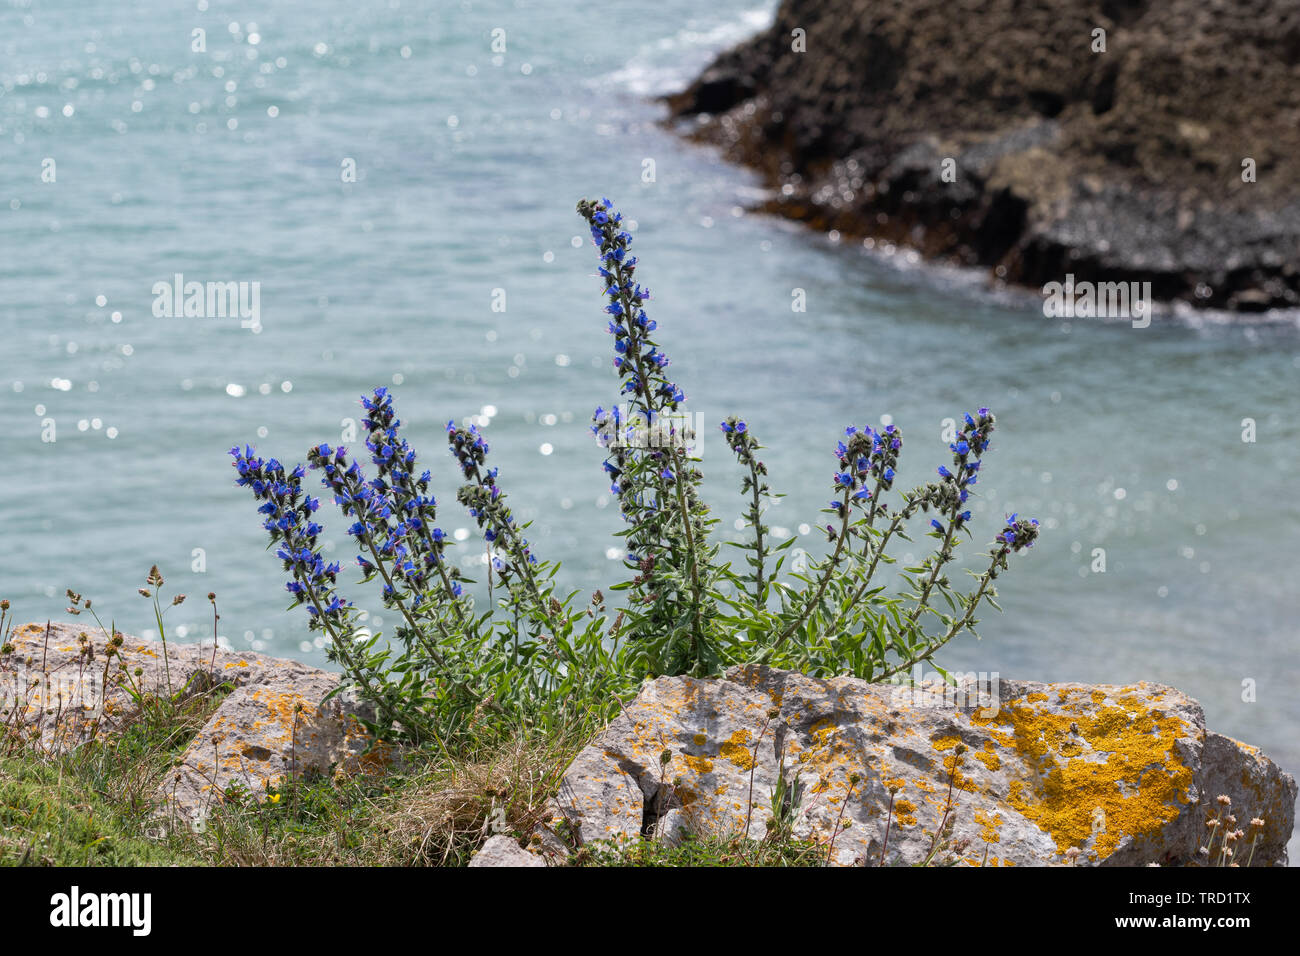 Viper's bugloss (Echium vulgare), a blue wildflower in the borage family, growing on the cliffs on the Pembrokeshire coast during June, Wales, UK Stock Photo